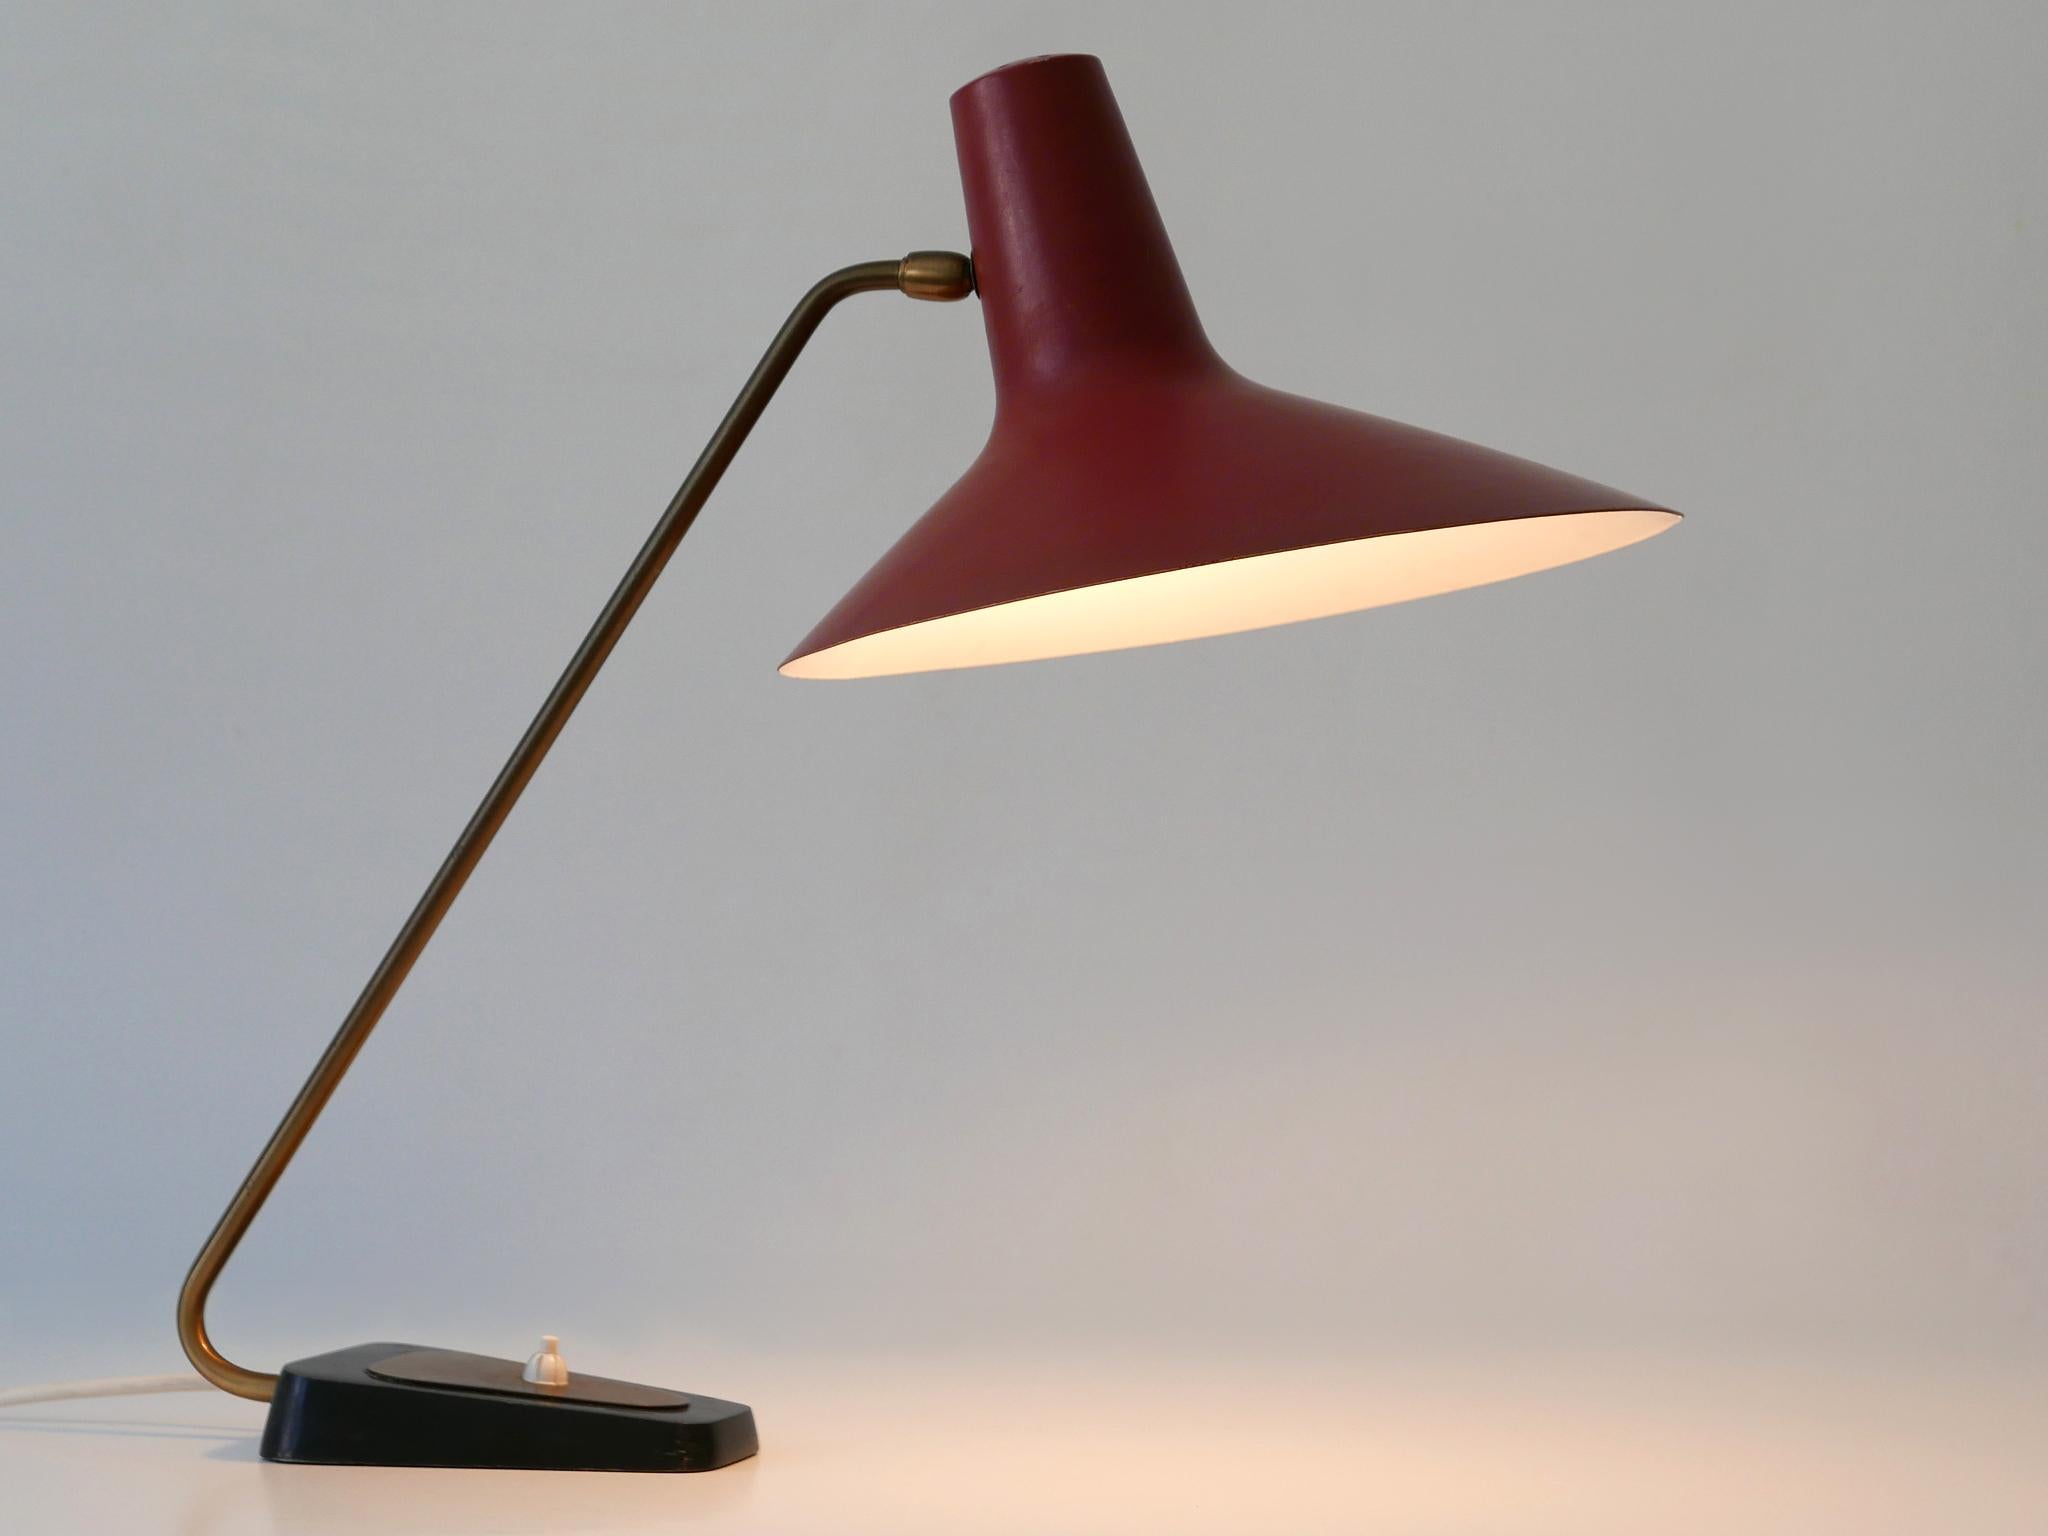 Mid-20th Century Exceptional Mid-Century Modern Table Lamp by Gebrüder Cosack Germany 1950s For Sale